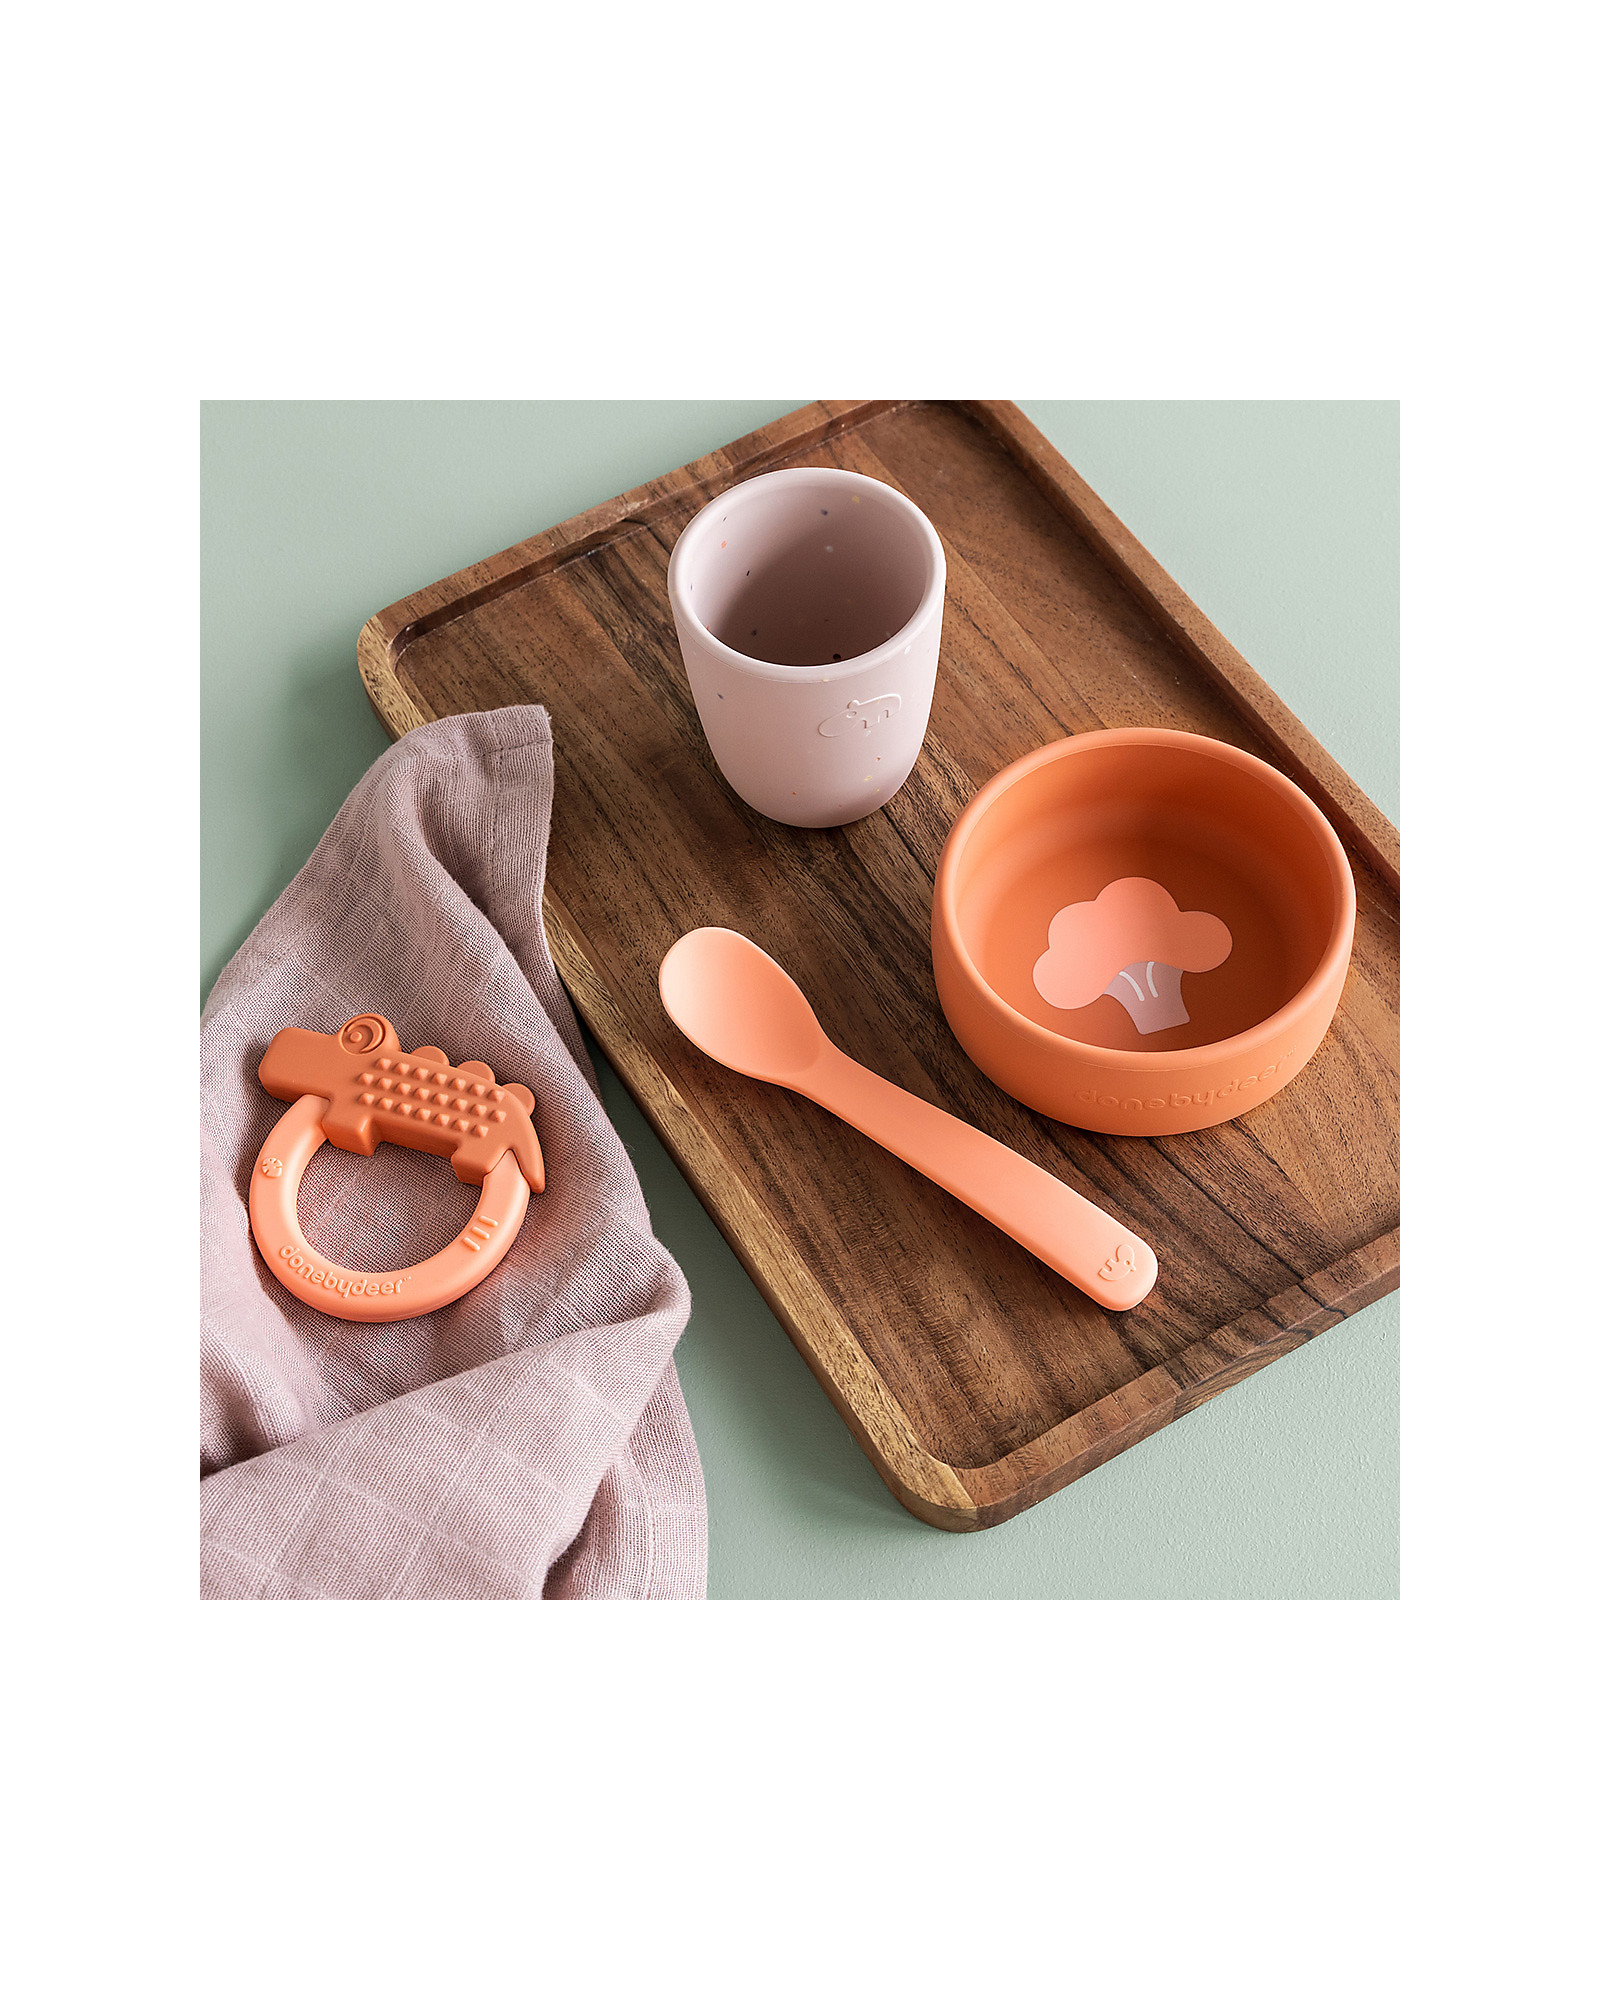 https://data.family-nation.com/imgprodotto/done-by-deer-first-meal-set-bowl-mug-spoon-papaya-100-food-grade-silicone-meal-sets_469296_zoom.jpg